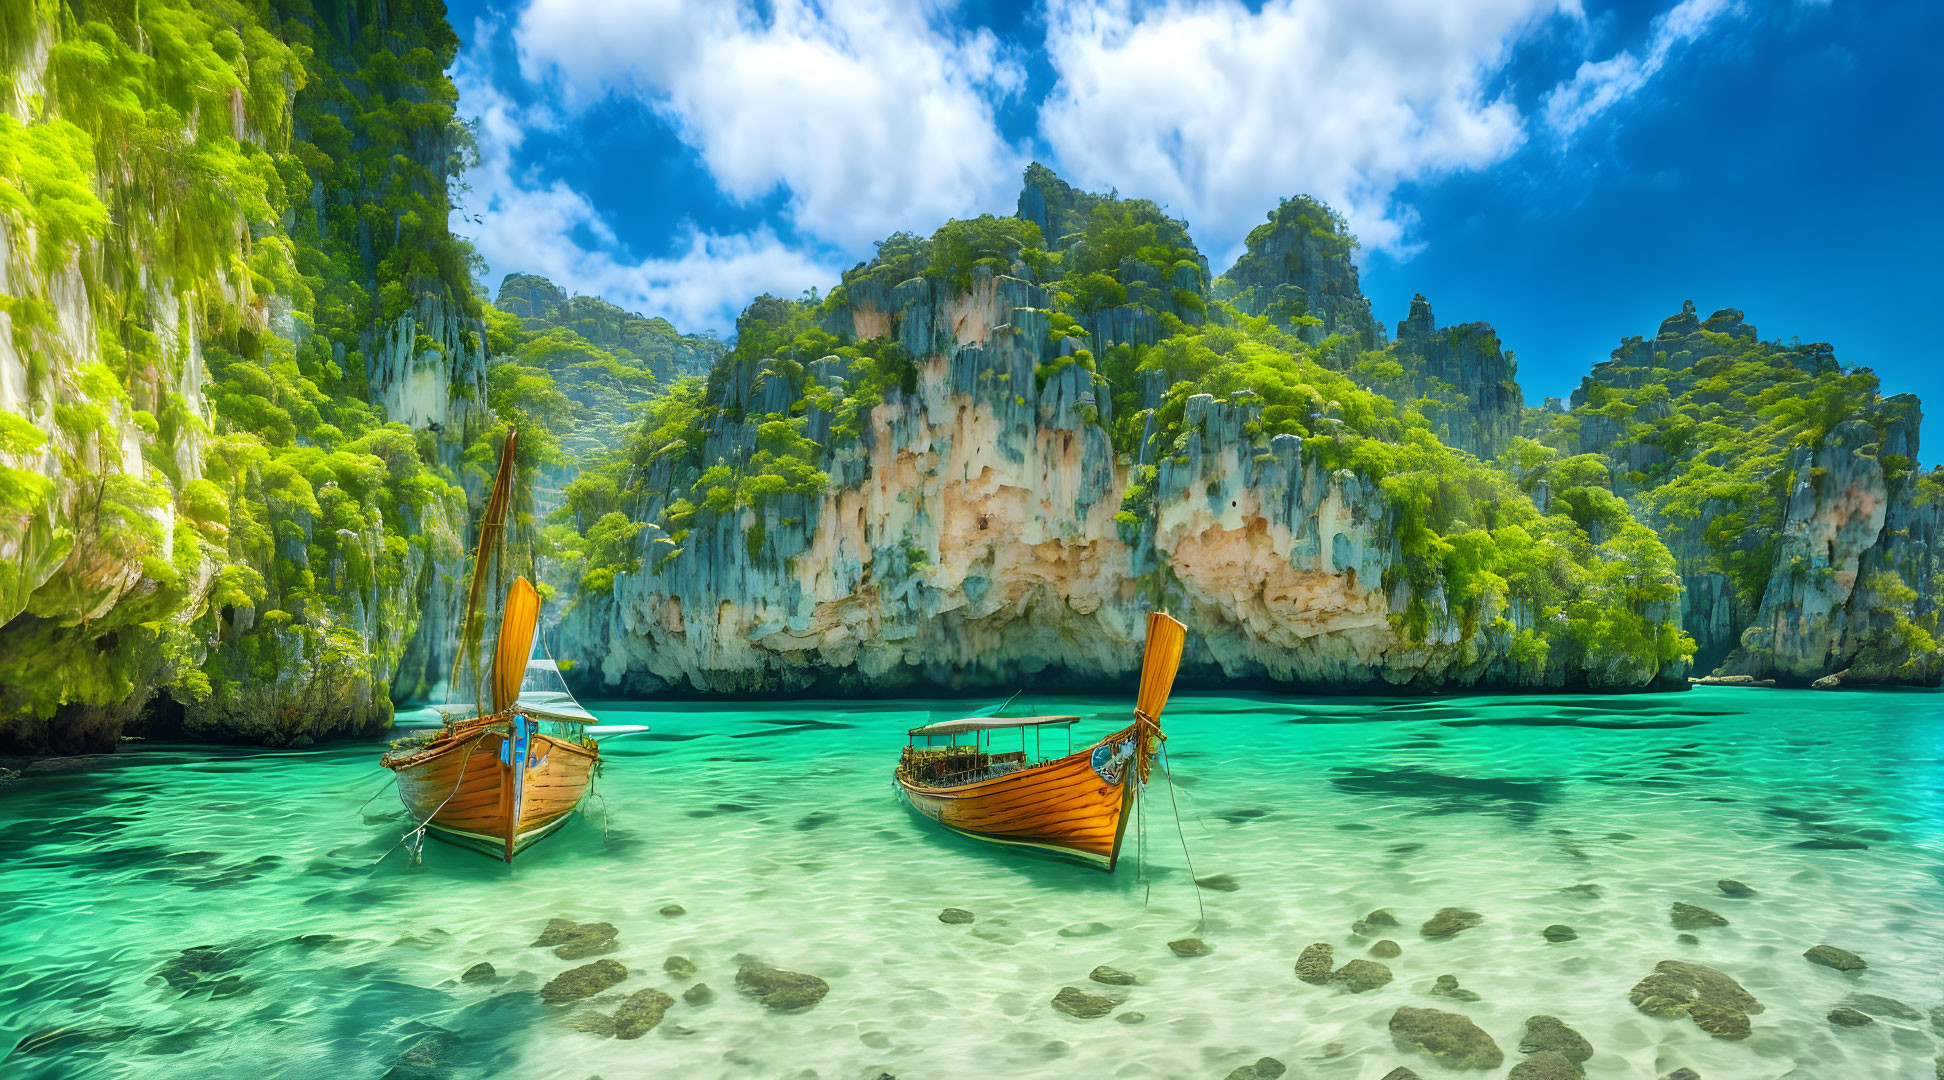 Scenic view of traditional longtail boats on turquoise water by rugged cliff